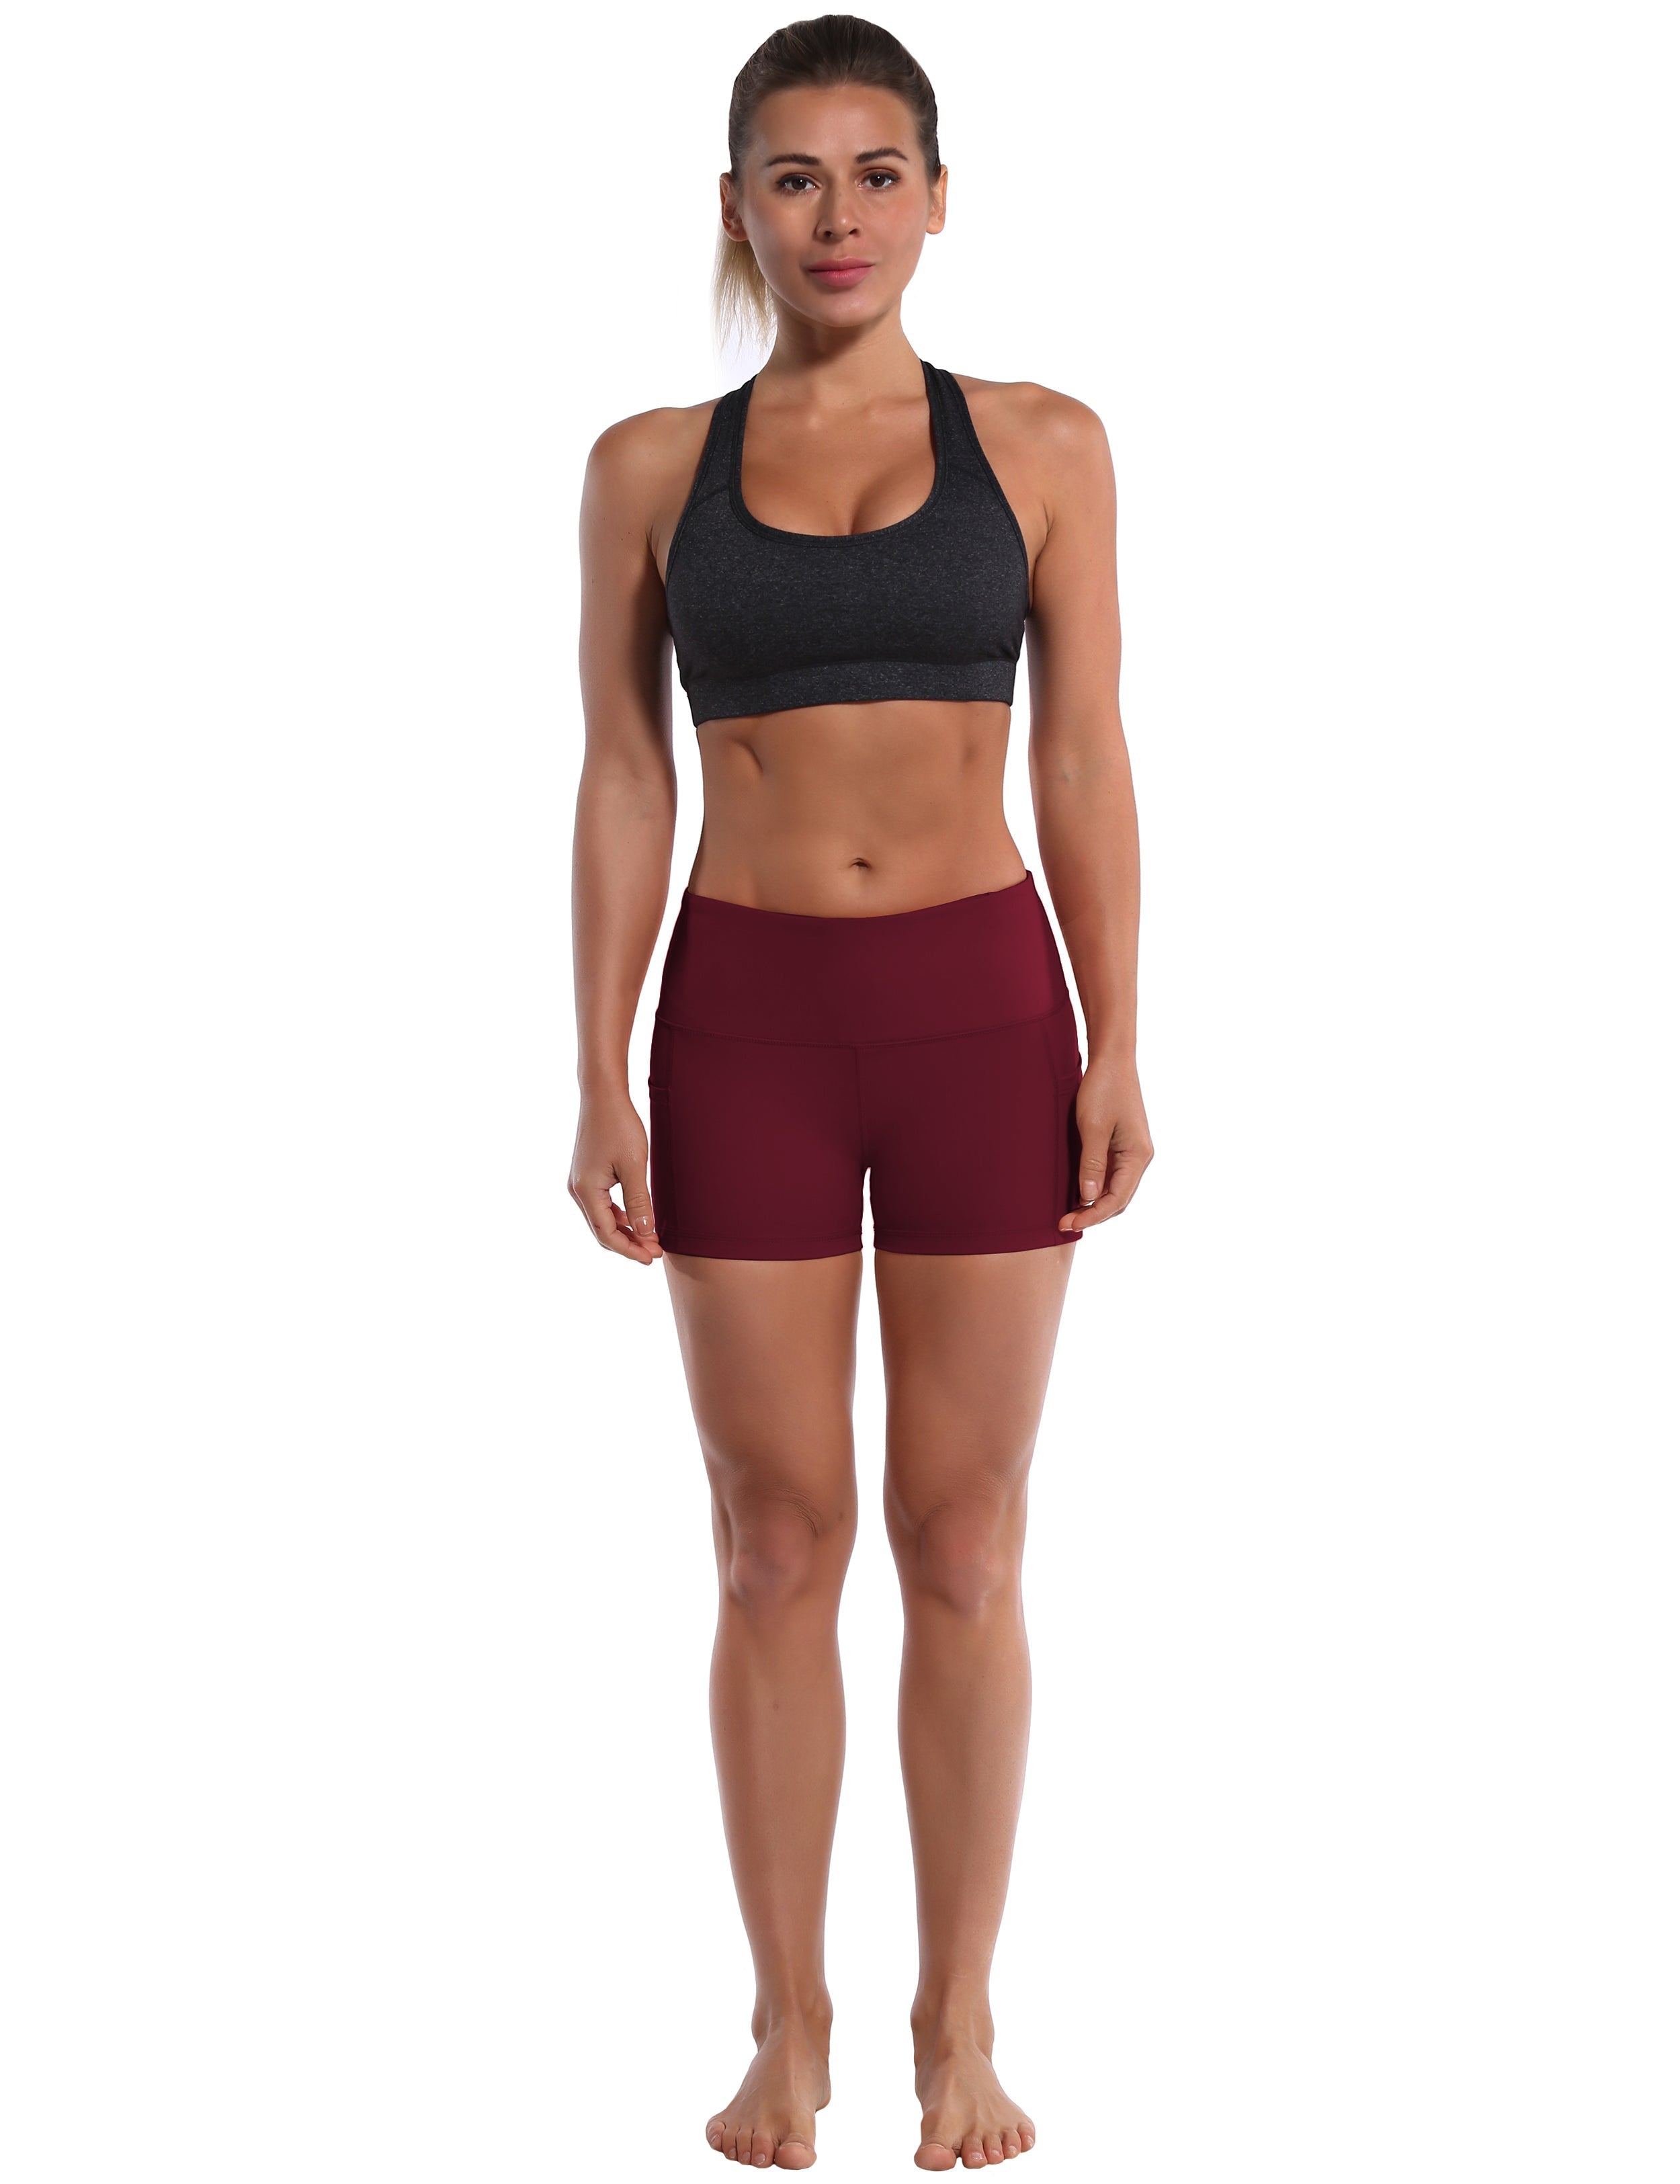 2.5" Side Pockets Tall Size Shorts cherryred Sleek, soft, smooth and totally comfortable: our newest sexy style is here. Softest-ever fabric High elasticity High density 4-way stretch Fabric doesn't attract lint easily No see-through Moisture-wicking Machine wash 78% Polyester, 22% Spandex